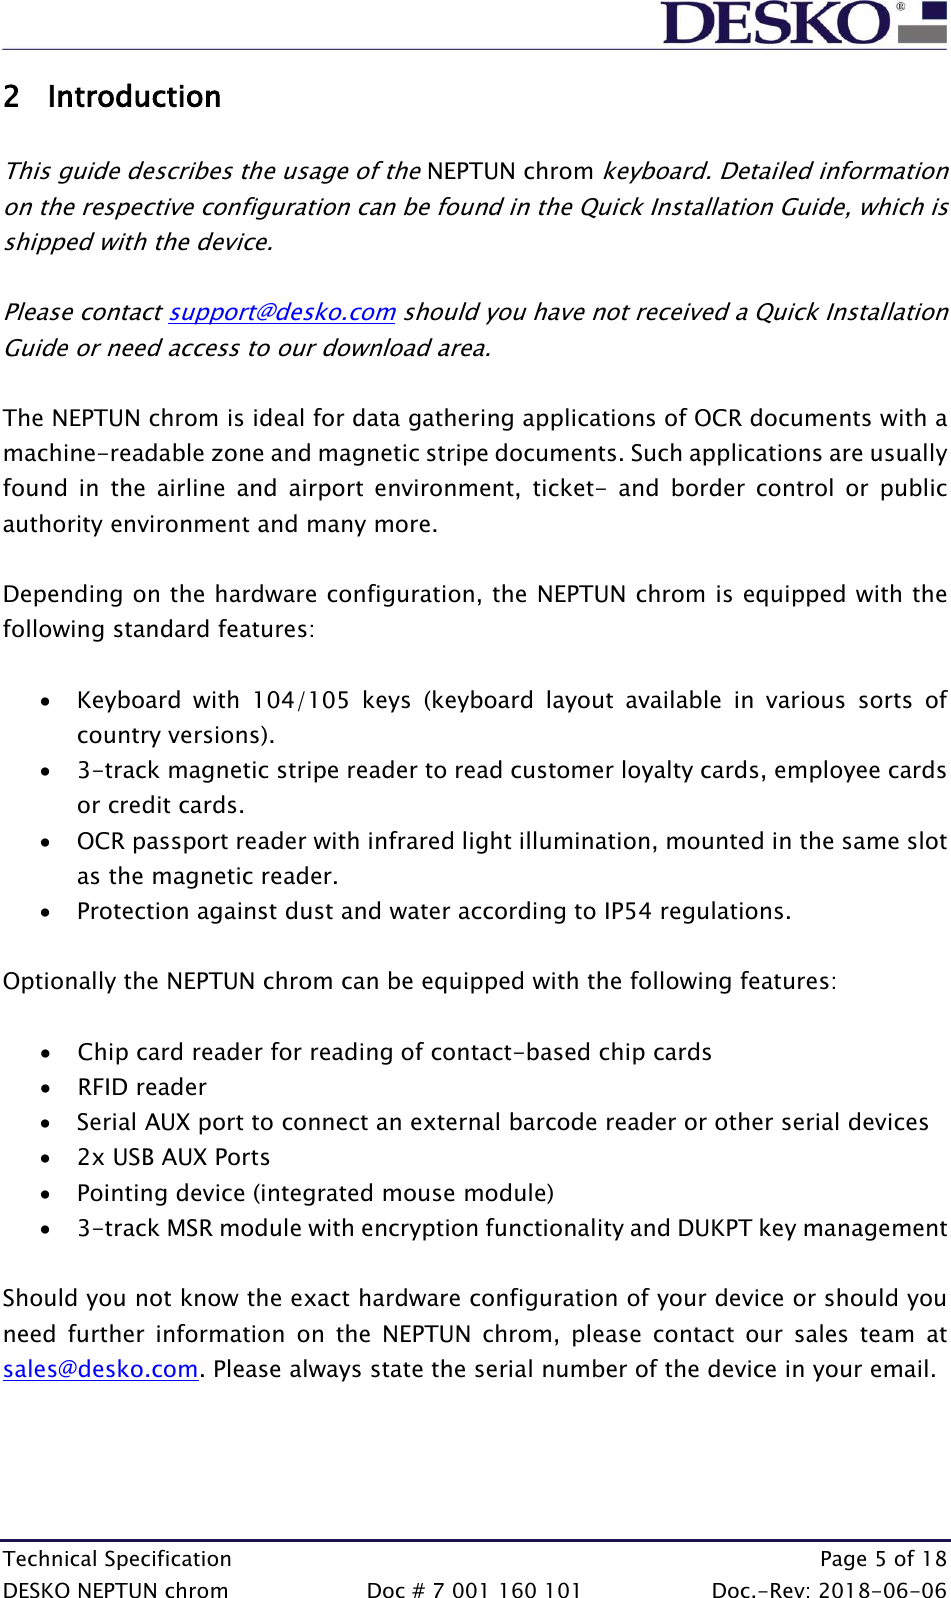  Technical Specification    Page 5 of 18 DESKO NEPTUN chrom  Doc # 7 001 160 101  Doc.-Rev: 2018-06-06 2 Introduction  This guide describes the usage of the NEPTUN chrom keyboard. Detailed information on the respective configuration can be found in the Quick Installation Guide, which is shipped with the device.  Please contact support@desko.com should you have not received a Quick Installation Guide or need access to our download area.  The NEPTUN chrom is ideal for data gathering applications of OCR documents with a machine-readable zone and magnetic stripe documents. Such applications are usually found  in  the  airline  and  airport  environment,  ticket-  and  border  control  or  public authority environment and many more.   Depending on the hardware configuration, the NEPTUN chrom is equipped with the following standard features:  • Keyboard  with  104/105  keys  (keyboard  layout  available  in  various  sorts  of country versions). • 3-track magnetic stripe reader to read customer loyalty cards, employee cards or credit cards. • OCR passport reader with infrared light illumination, mounted in the same slot as the magnetic reader.  • Protection against dust and water according to IP54 regulations.  Optionally the NEPTUN chrom can be equipped with the following features:  • Chip card reader for reading of contact-based chip cards • RFID reader • Serial AUX port to connect an external barcode reader or other serial devices • 2x USB AUX Ports  • Pointing device (integrated mouse module) • 3-track MSR module with encryption functionality and DUKPT key management  Should you not know the exact hardware configuration of your device or should you need  further  information  on  the  NEPTUN  chrom,  please  contact  our  sales  team  at sales@desko.com. Please always state the serial number of the device in your email.    